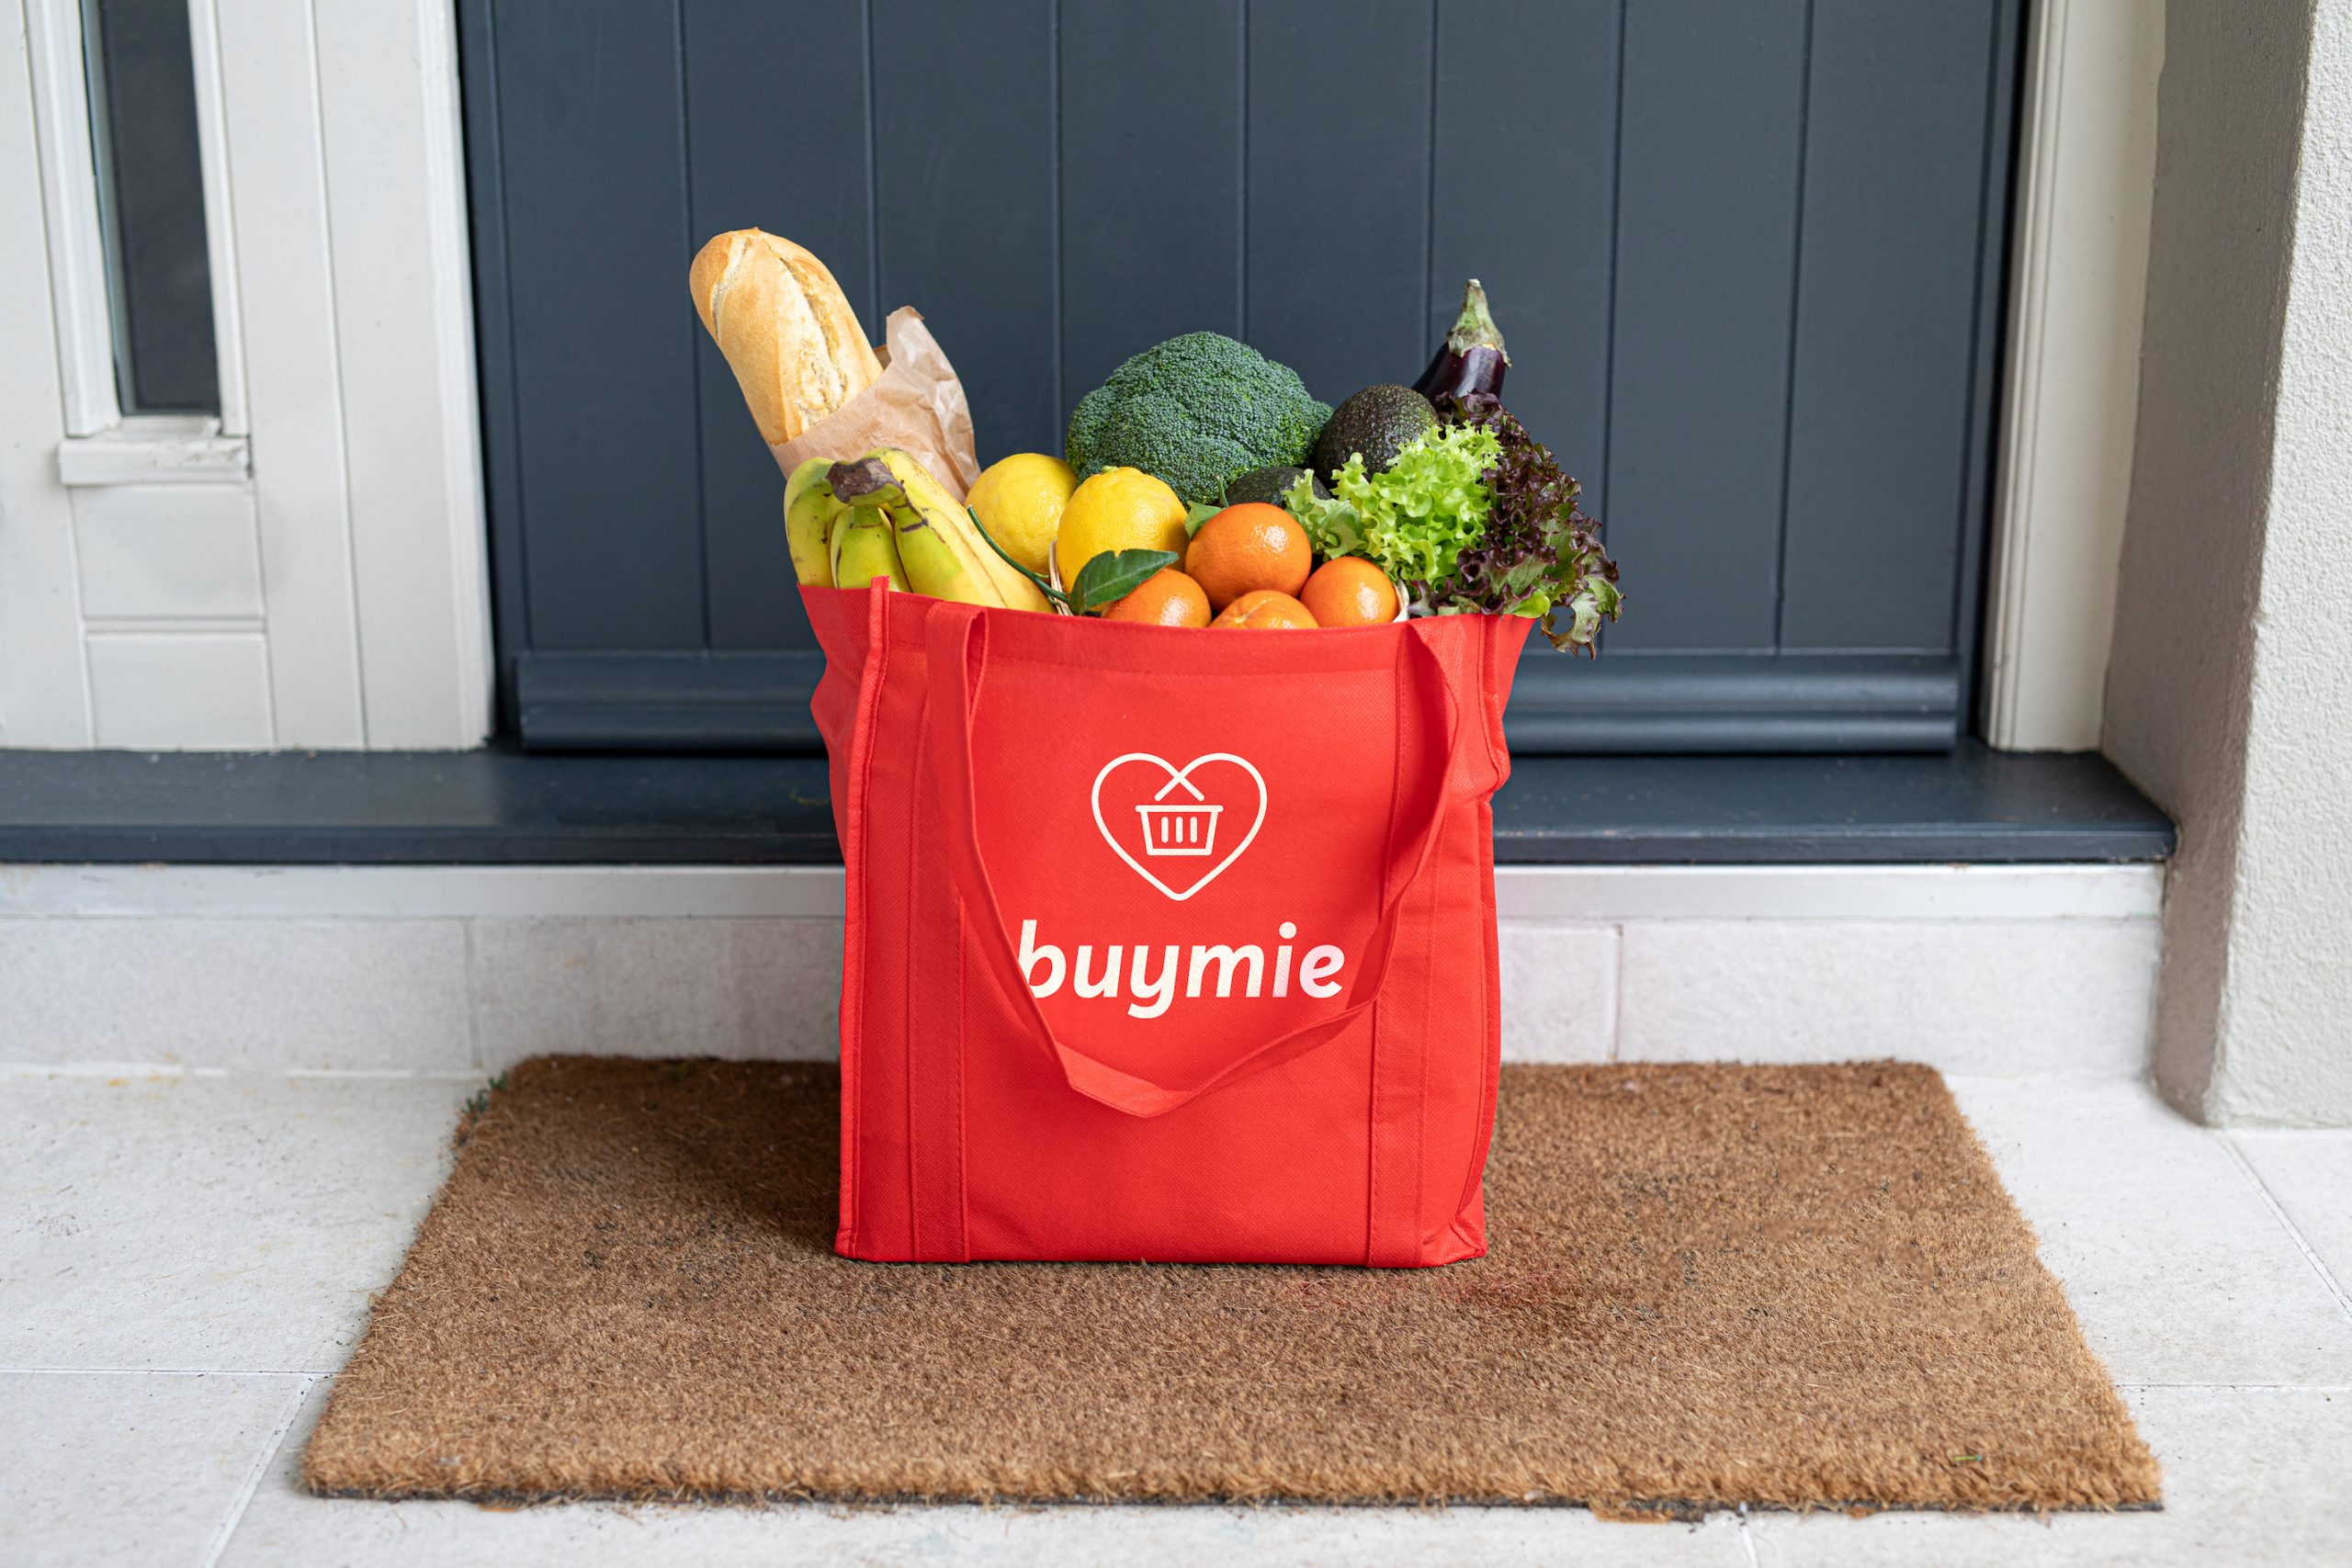 irish grocery delivery startup buymie